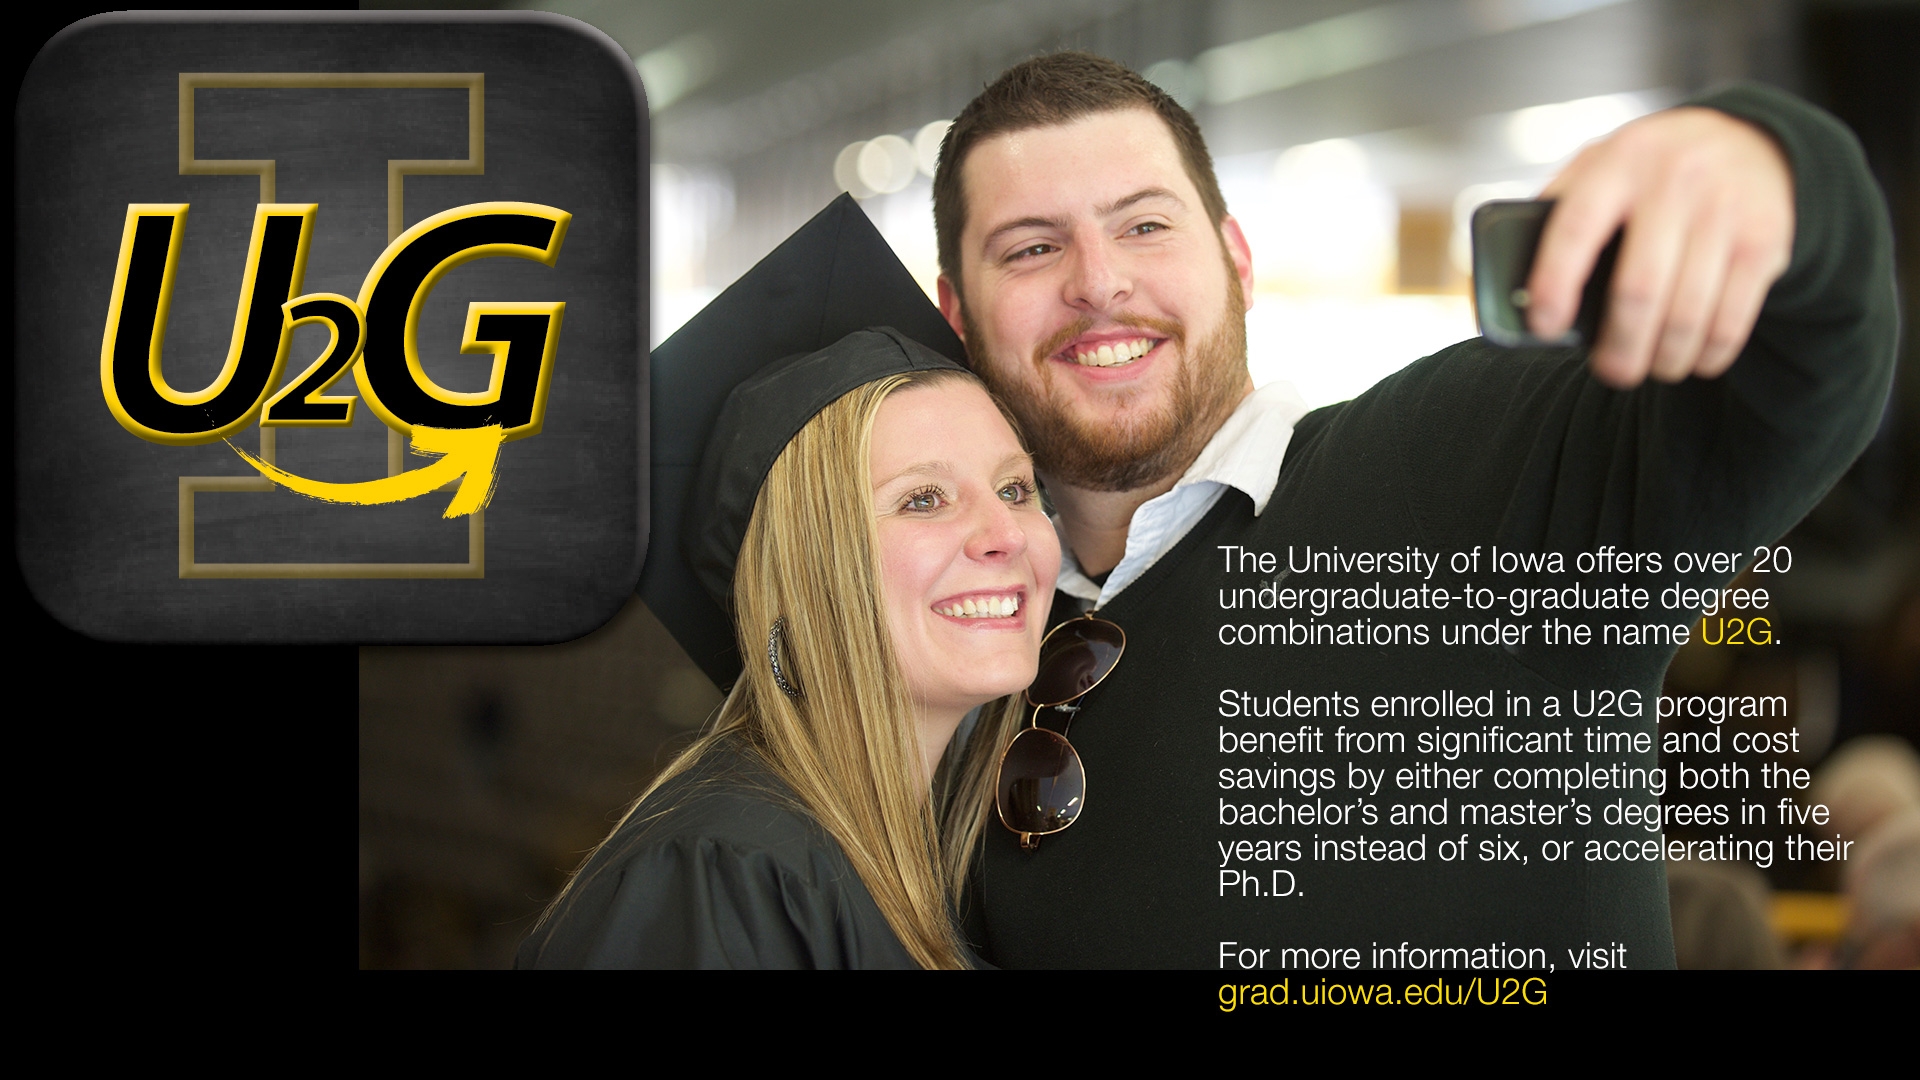 The University of Iowa offers over 20 undergraduate-to-graduate degree combinations under the name U2G. Students enrolled in a U2G program benefit from significant time and cost savings by either completing both the bachelor's and master's degrees in five years instead of six, or accelerating their Ph.D. For more information, visit grad.uiowa.edu/U2G